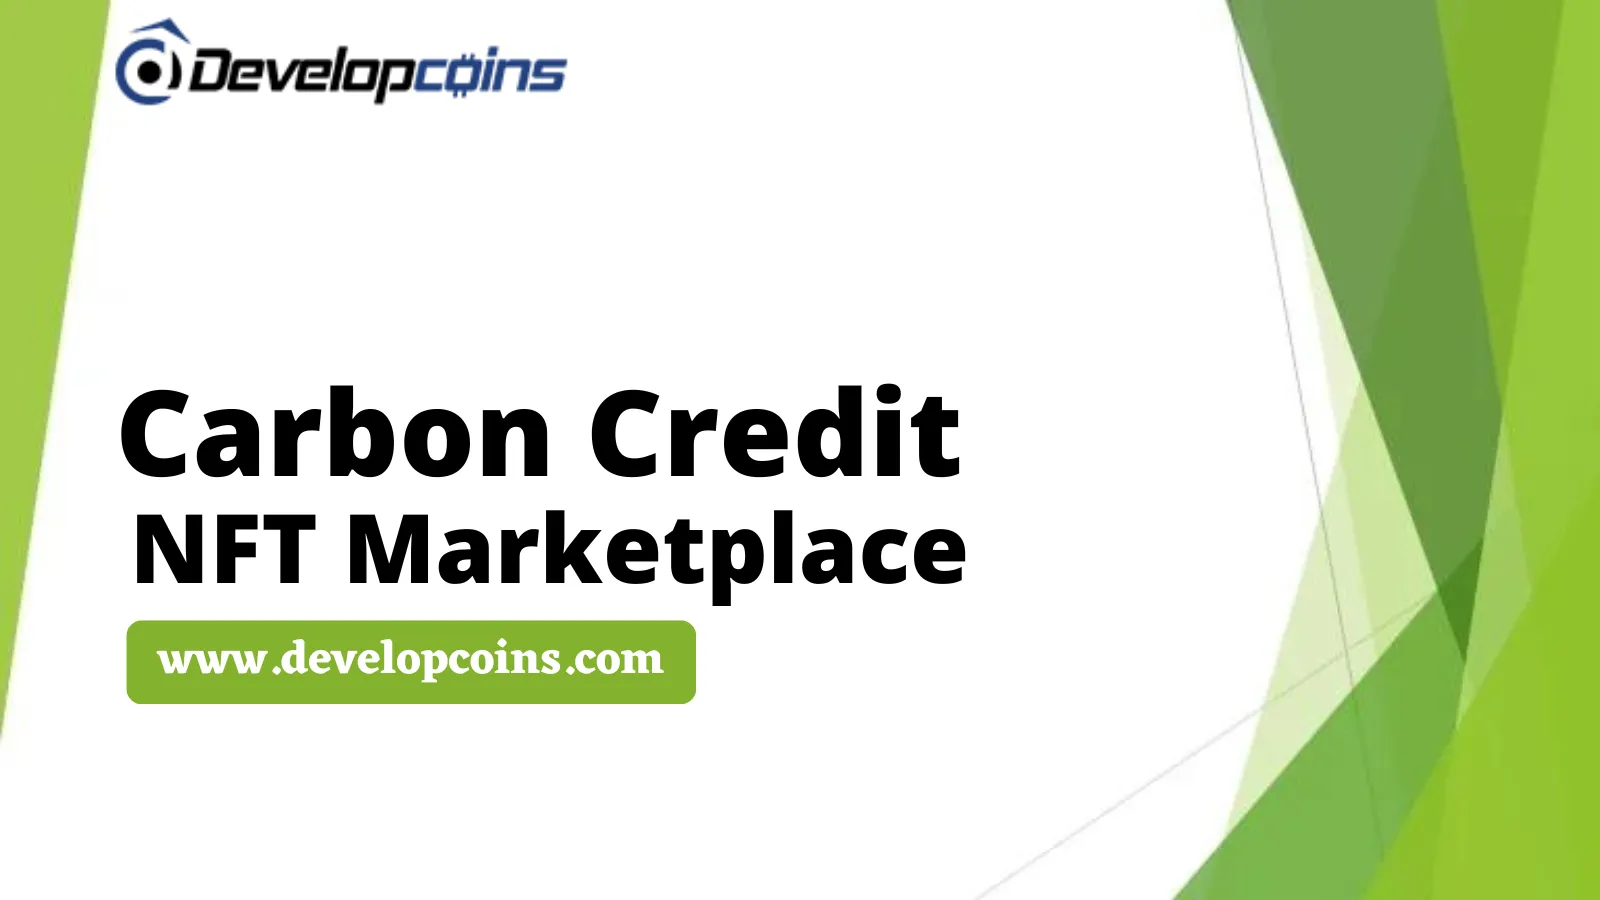 Build NFT Marketplace To Effectively Trade Your Carbon Credits